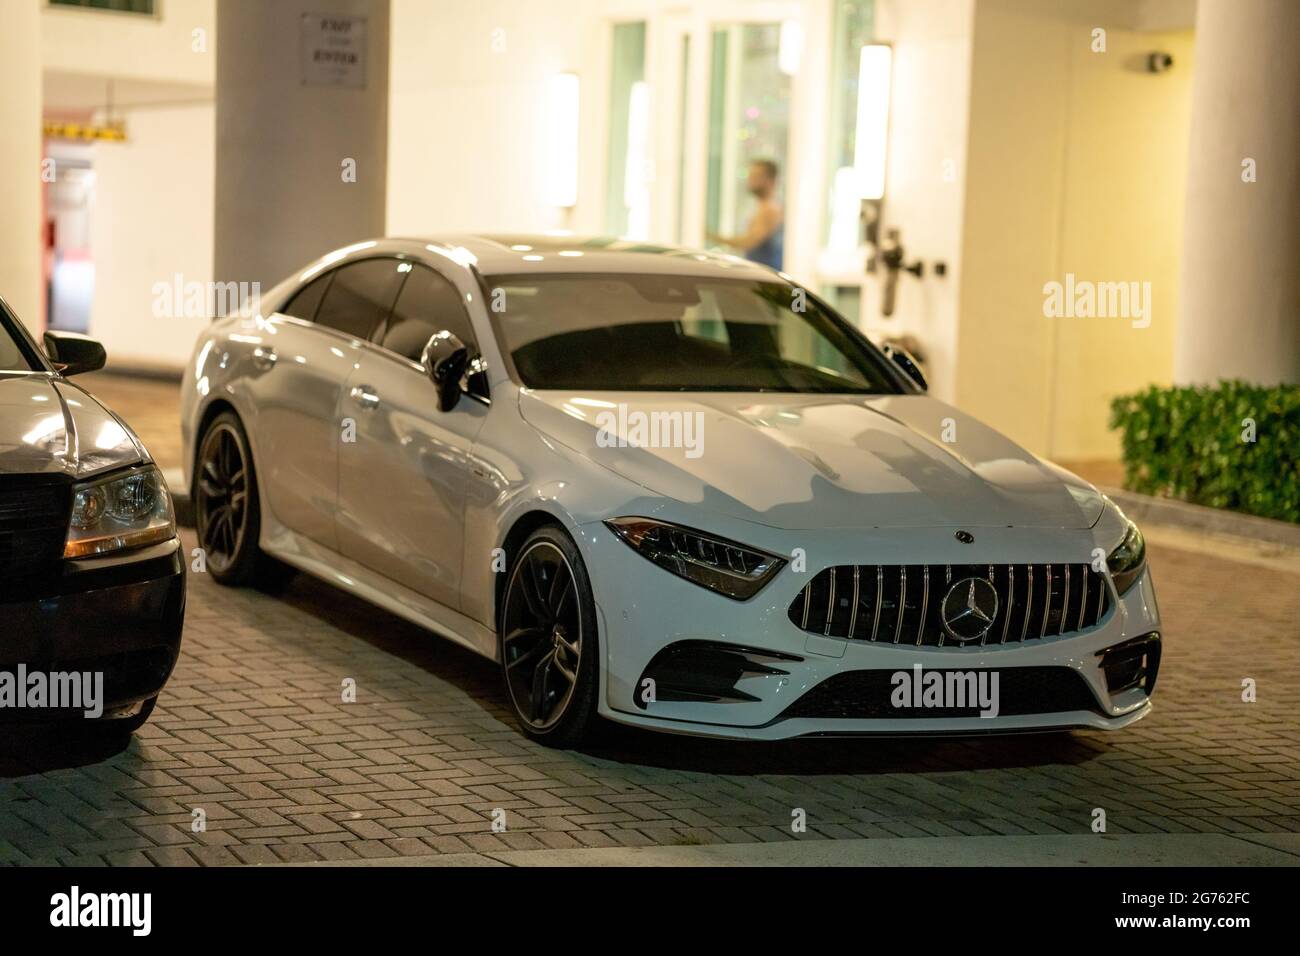 Photo of a sleek new Mercedes sedan parked in the city at night Stock Photo